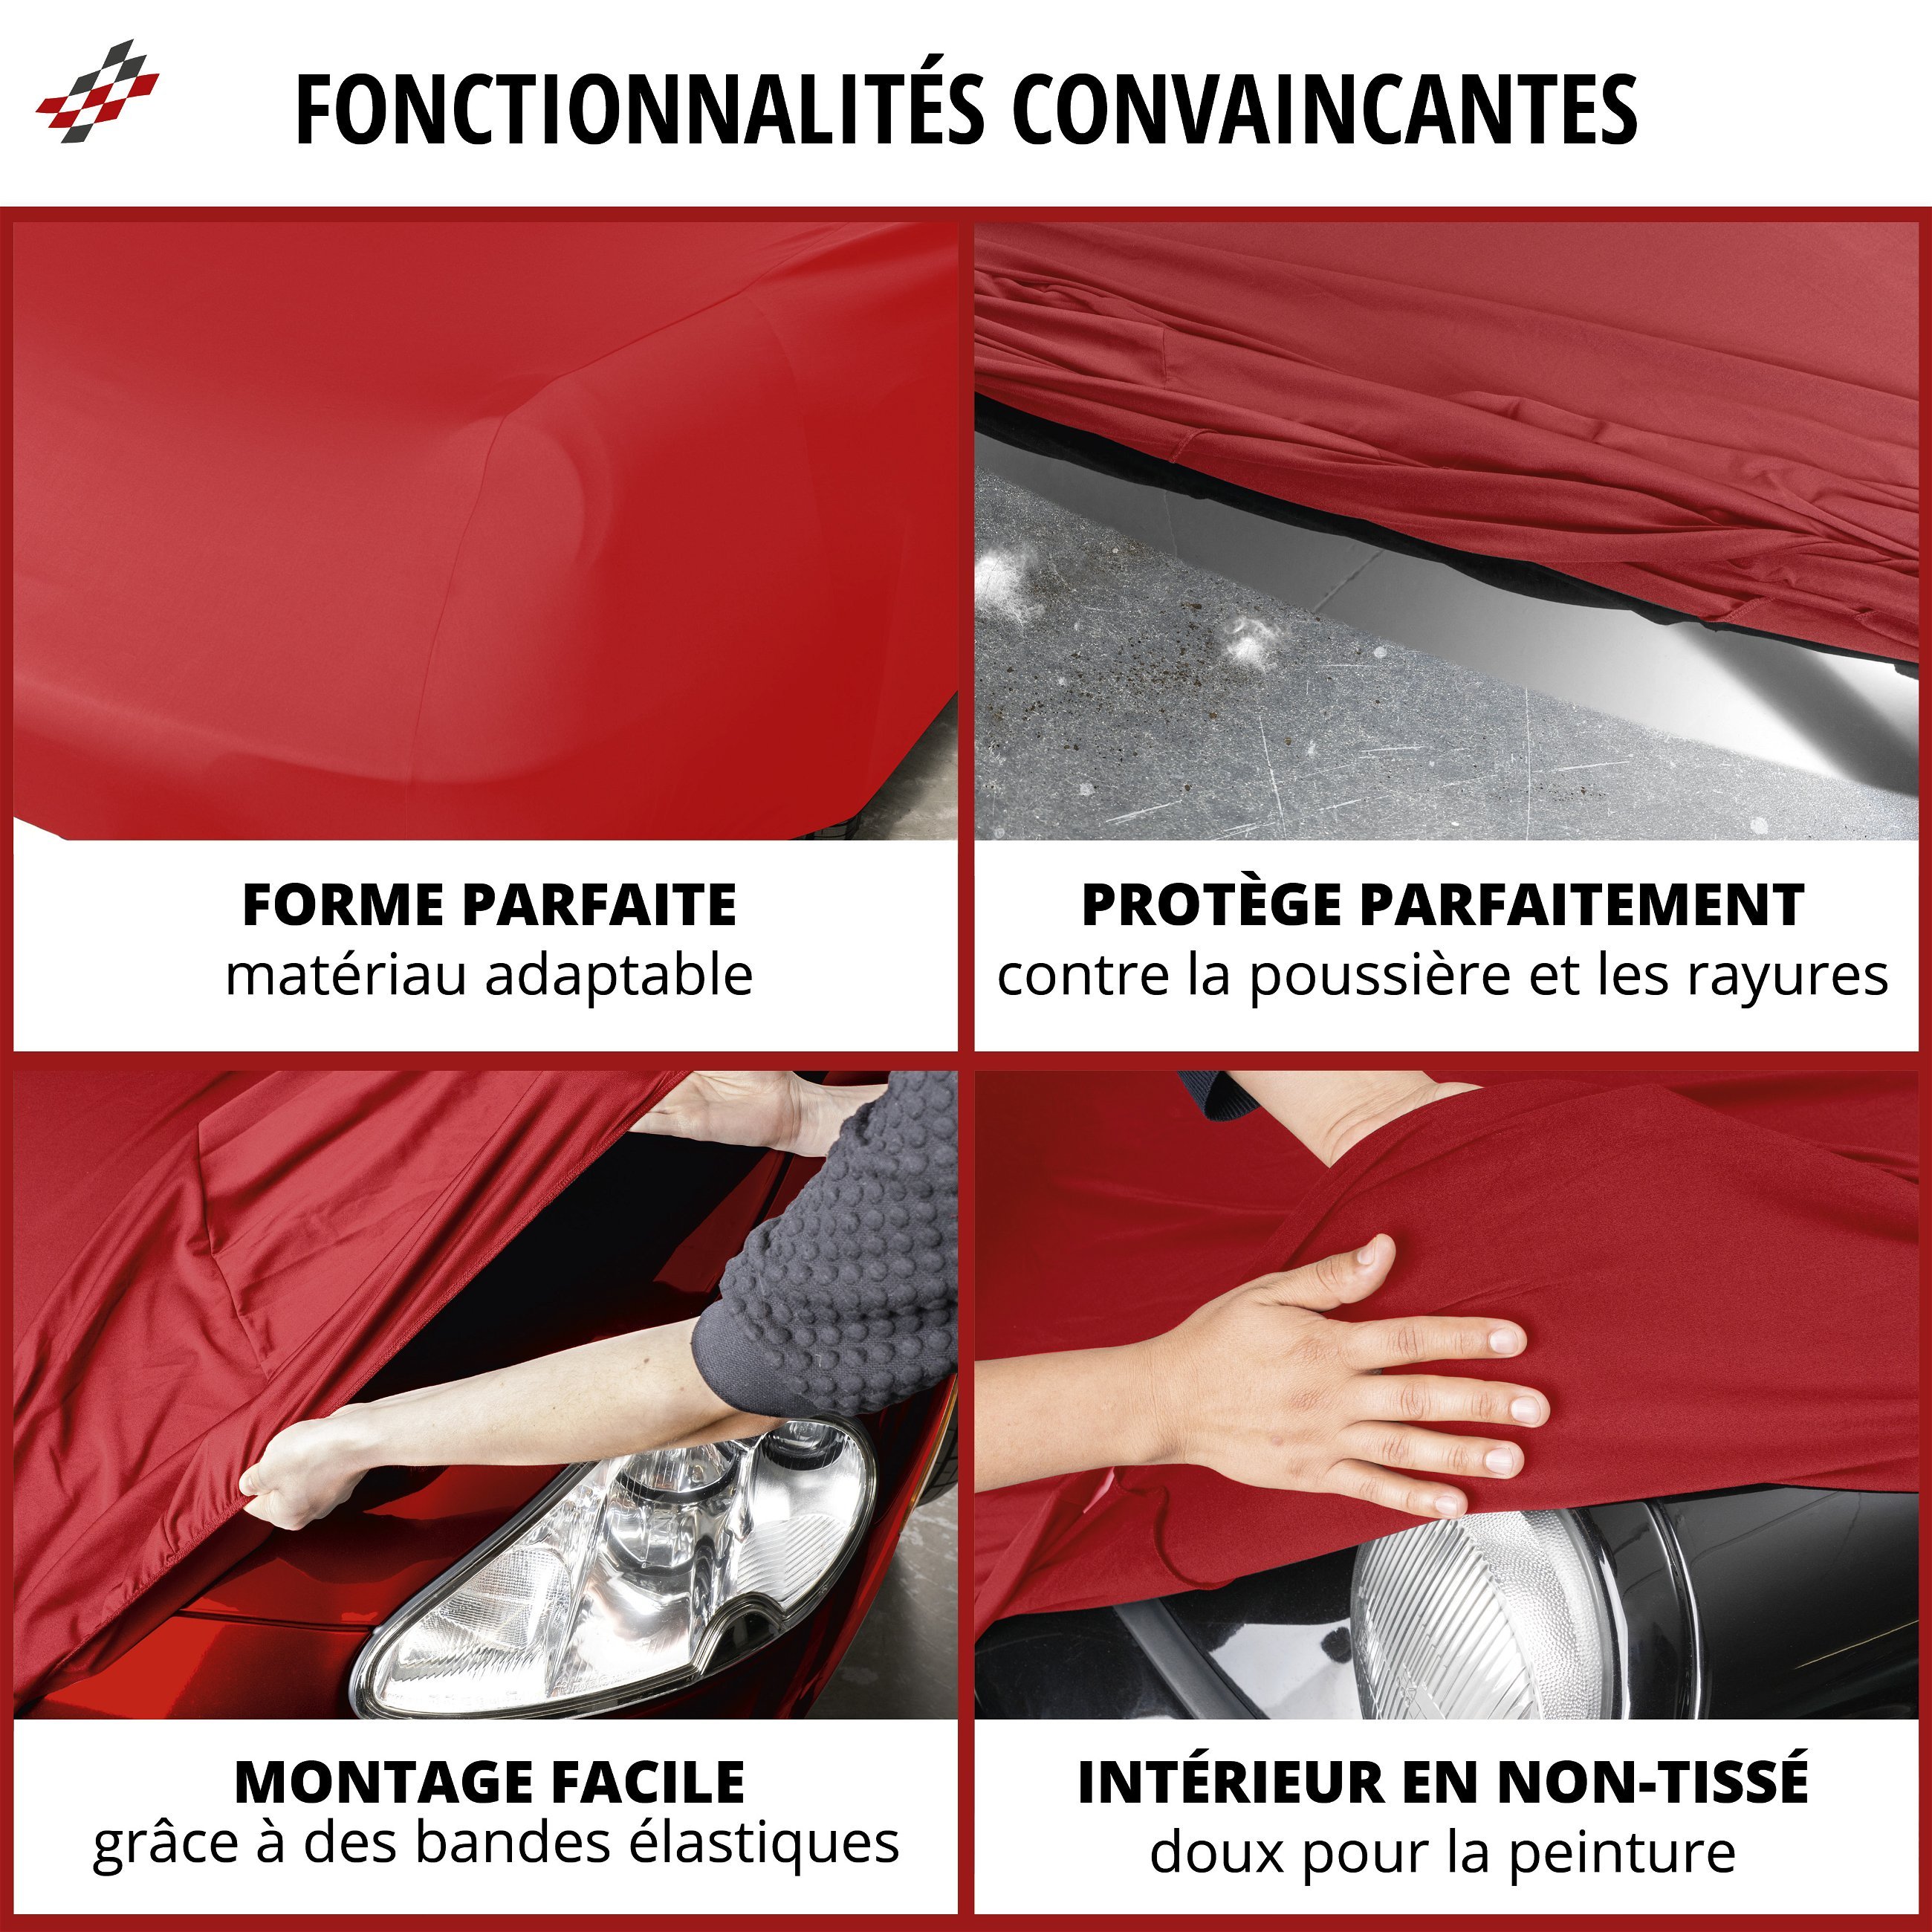 Bâche pour voiture Indoor Stretch Plus SUV taille M rouge